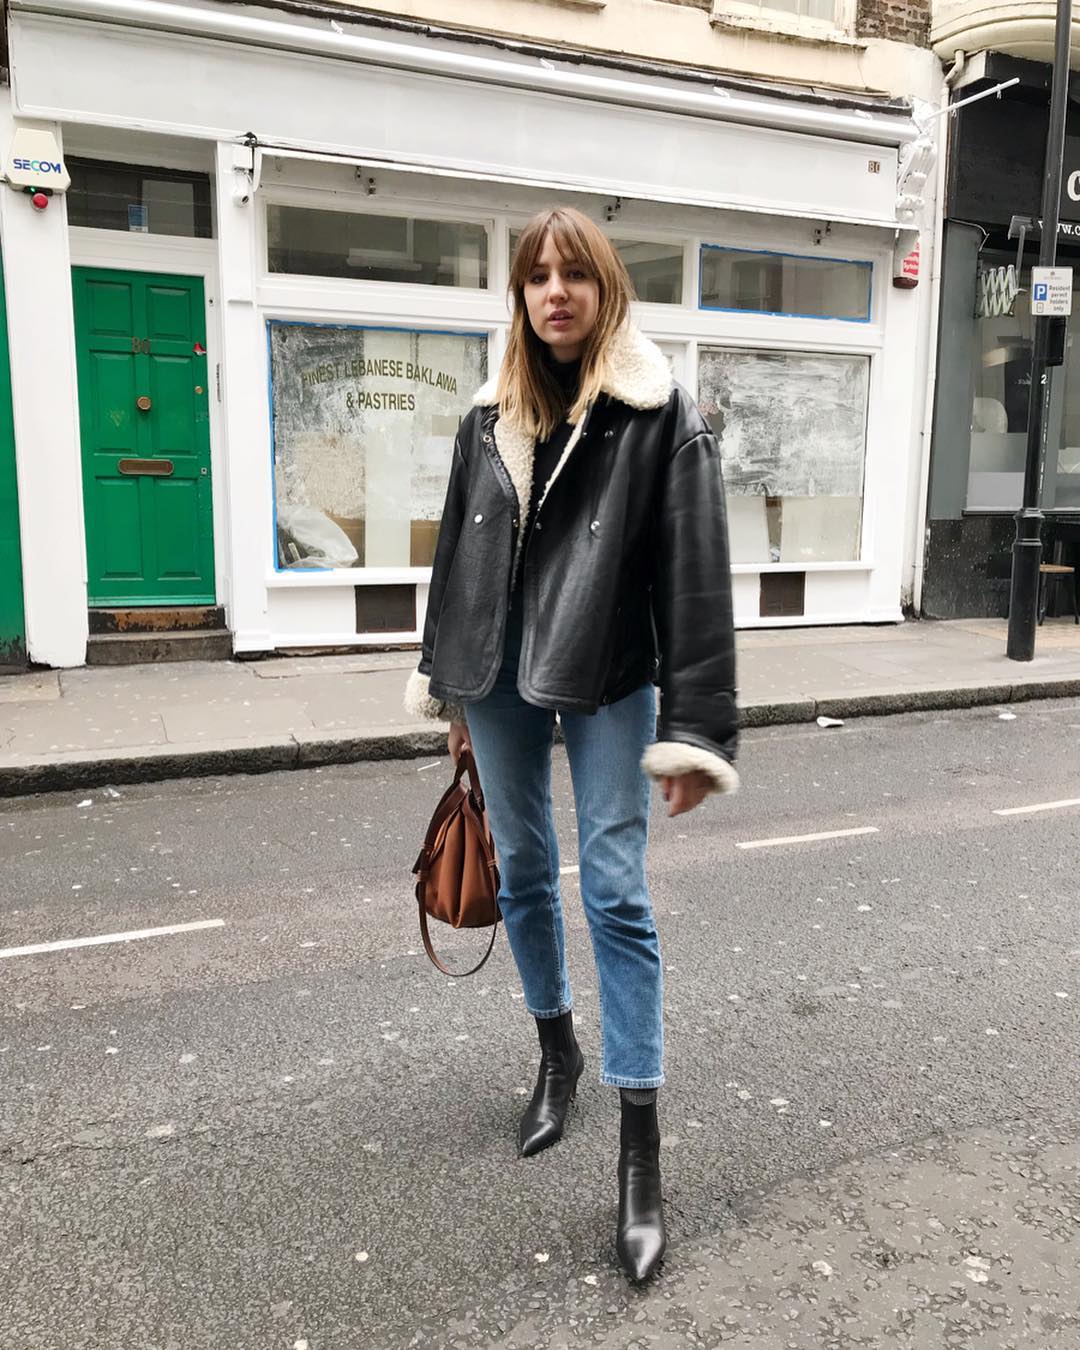 A Cool Way to Wear Your Cropped Jeans for Winter — @shotfromthestreet Lizzy Hadfield Winter Outfit Idea With Shearling Moto Jacket, Skinny Cropped Denim and Pointed Toe Boots